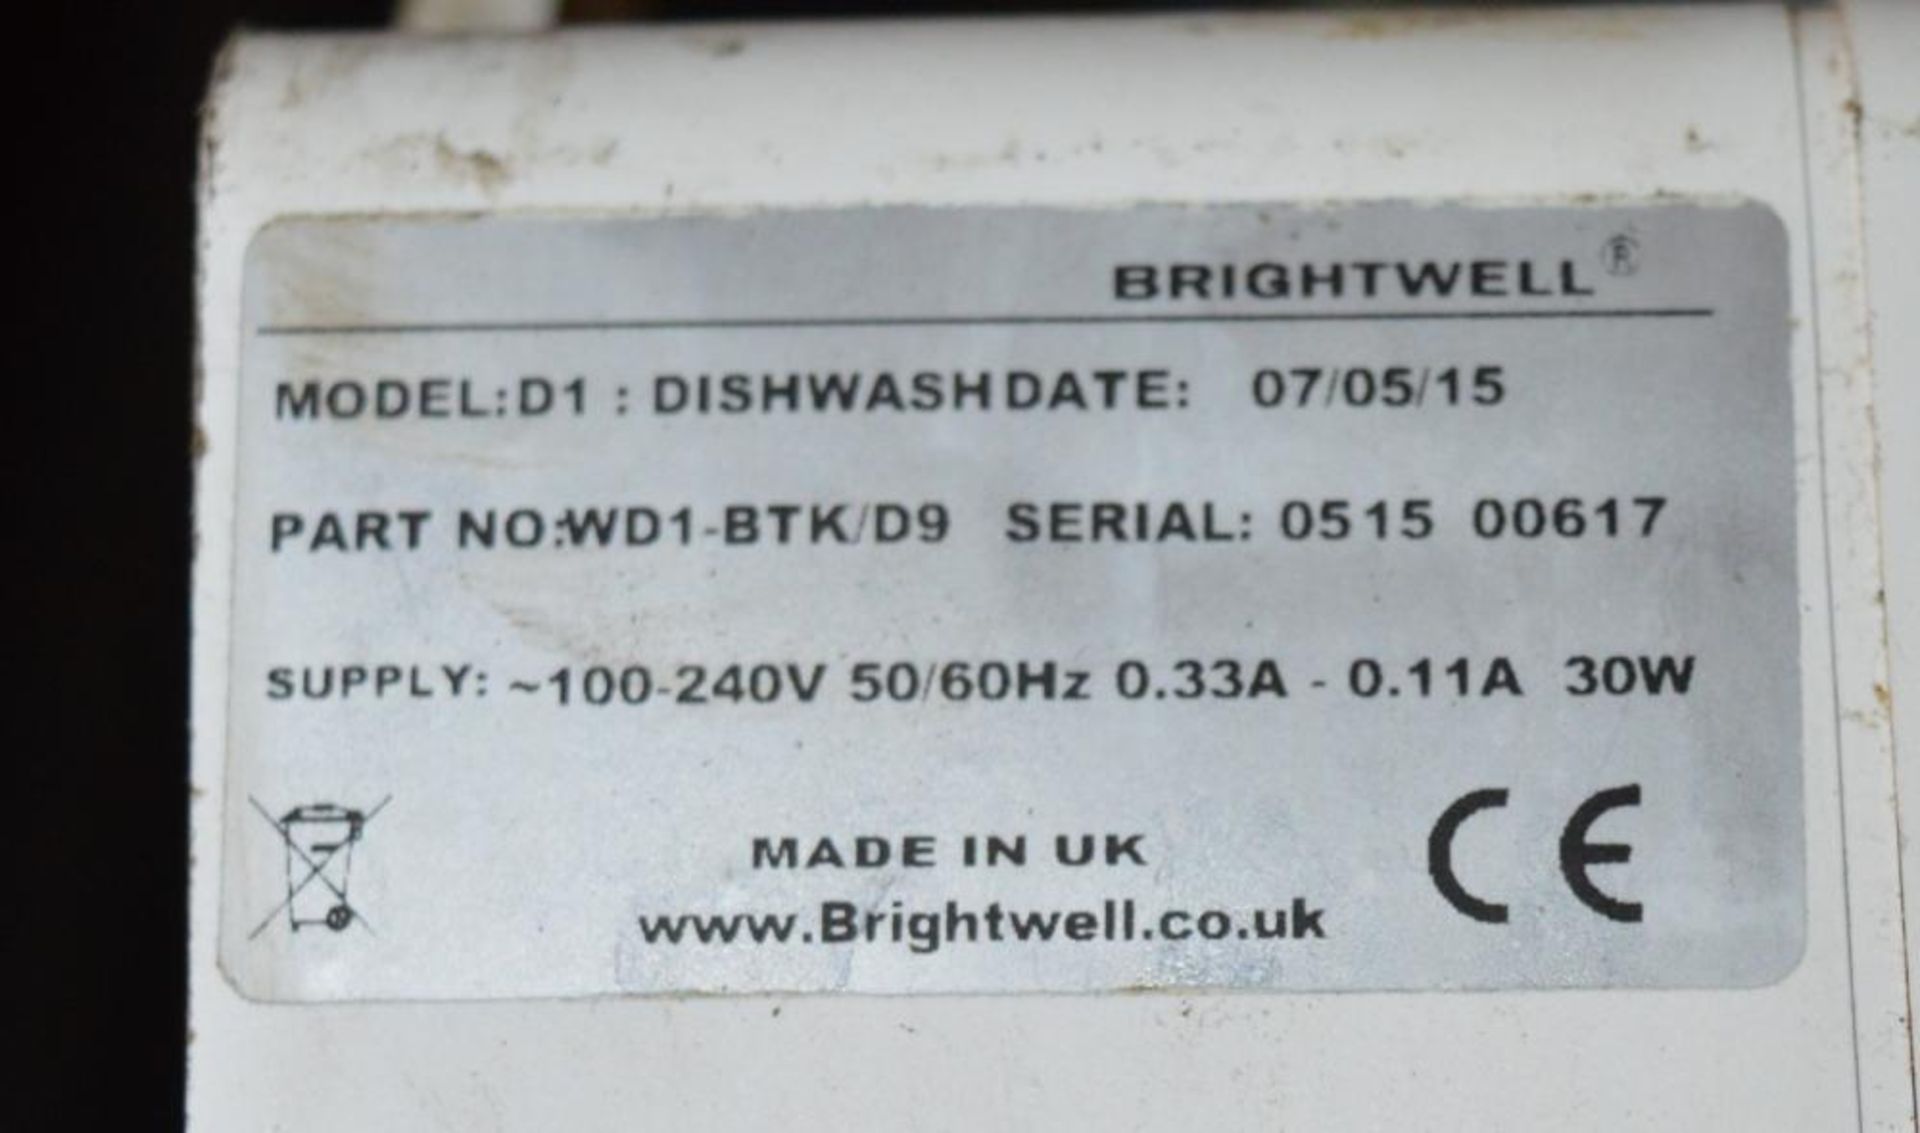 1 x Electrolux NHTG Stainless Steel Passthrough Dishwasher With Brightwell D1 Automatic Dosing Pump - Image 5 of 13